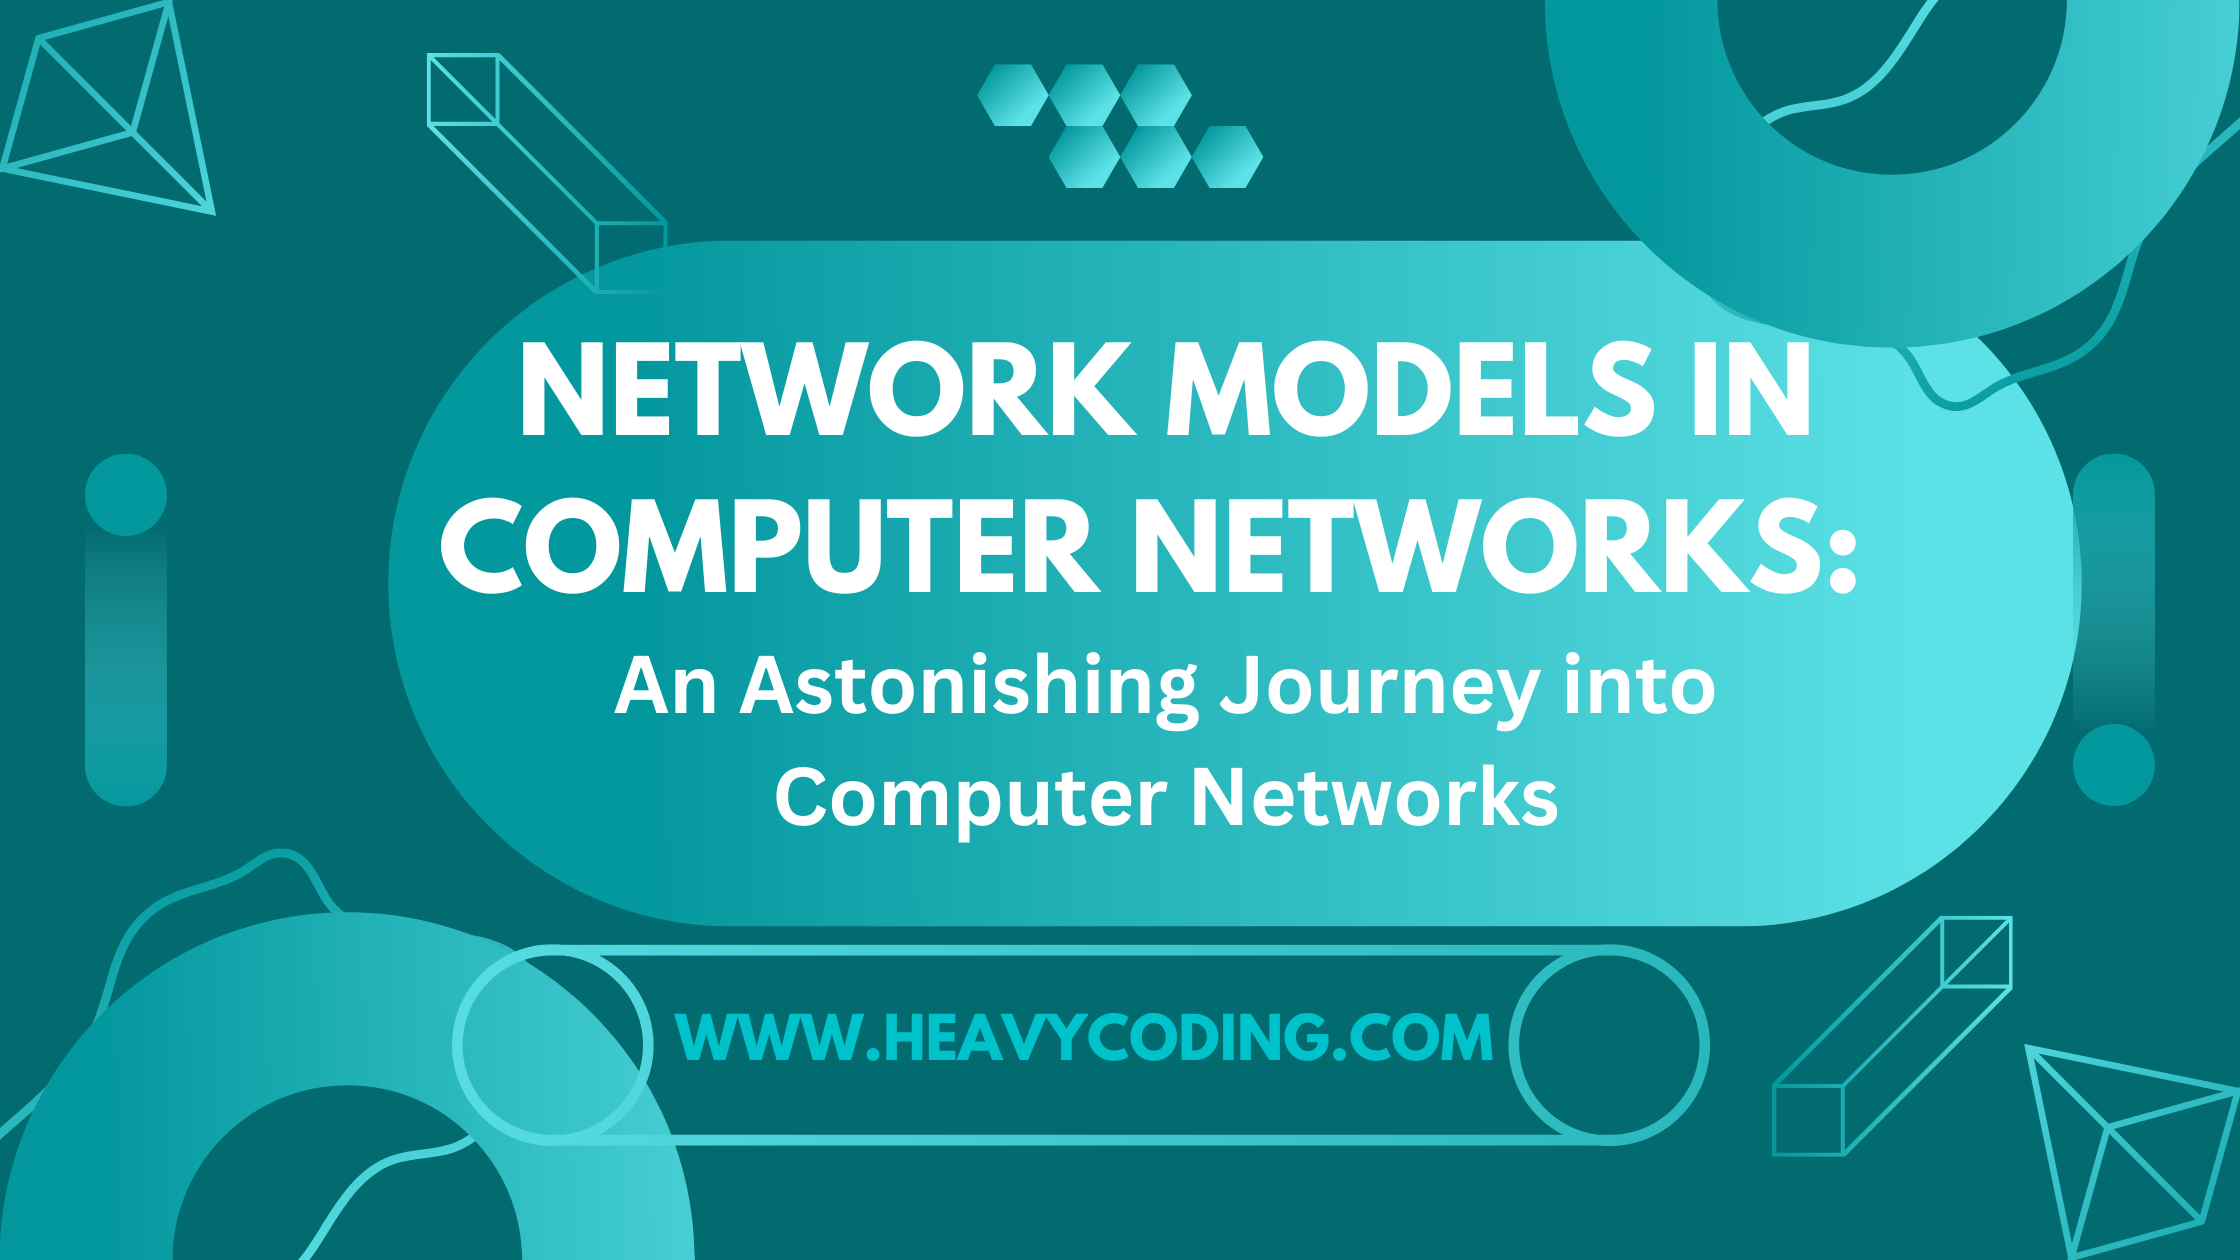 You are currently viewing Network Models in Computer Networks: An Astonishing Journey into Computer Networks